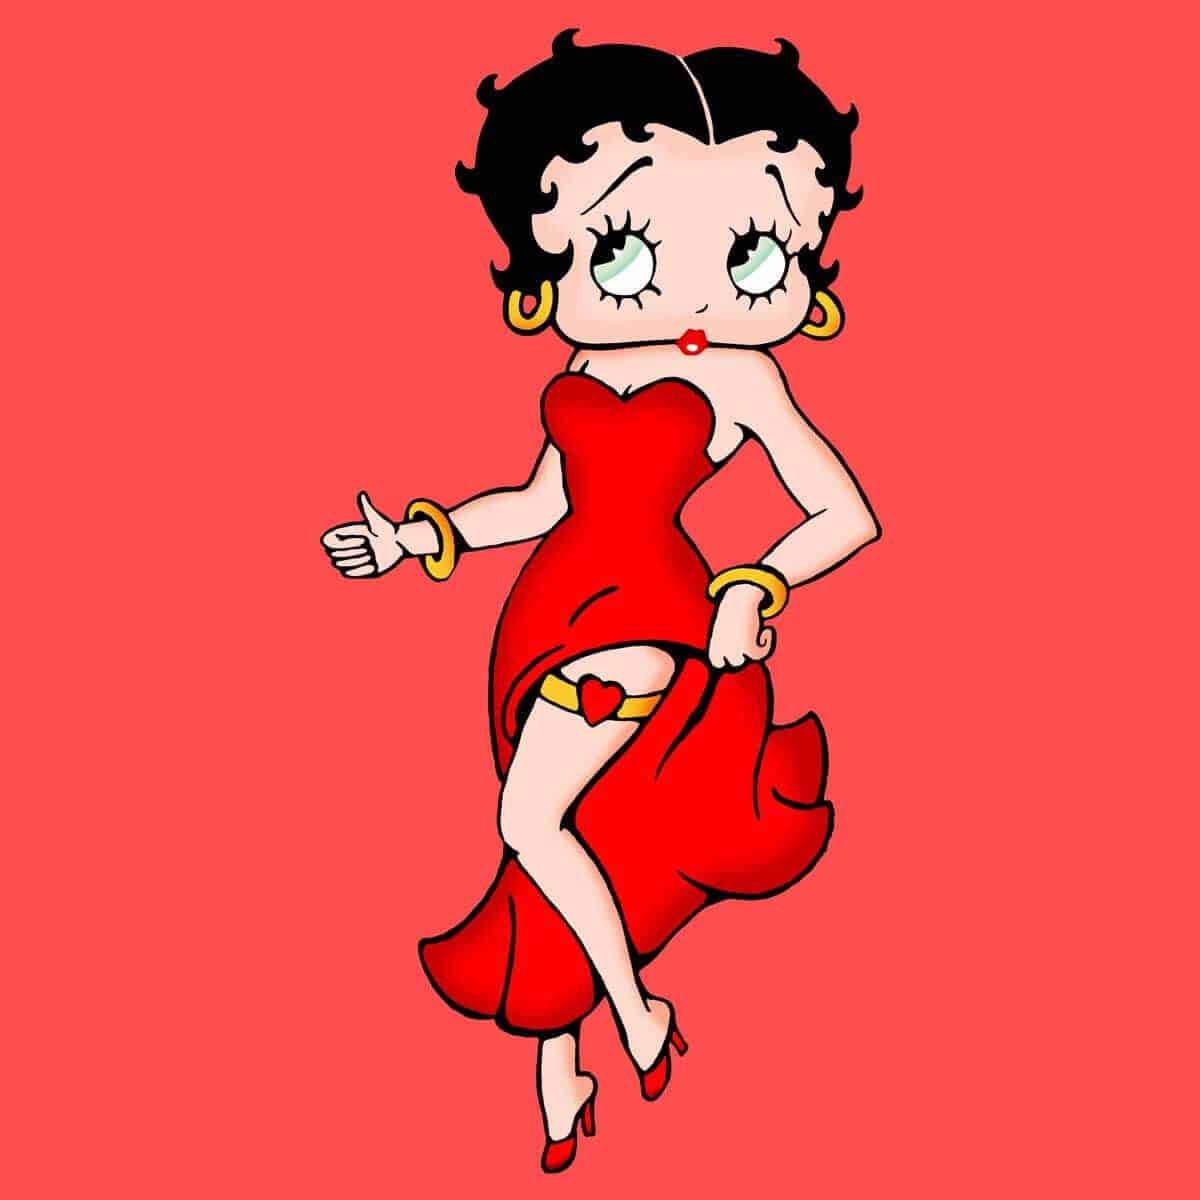 Betty Boop Female Character With Big Eyes